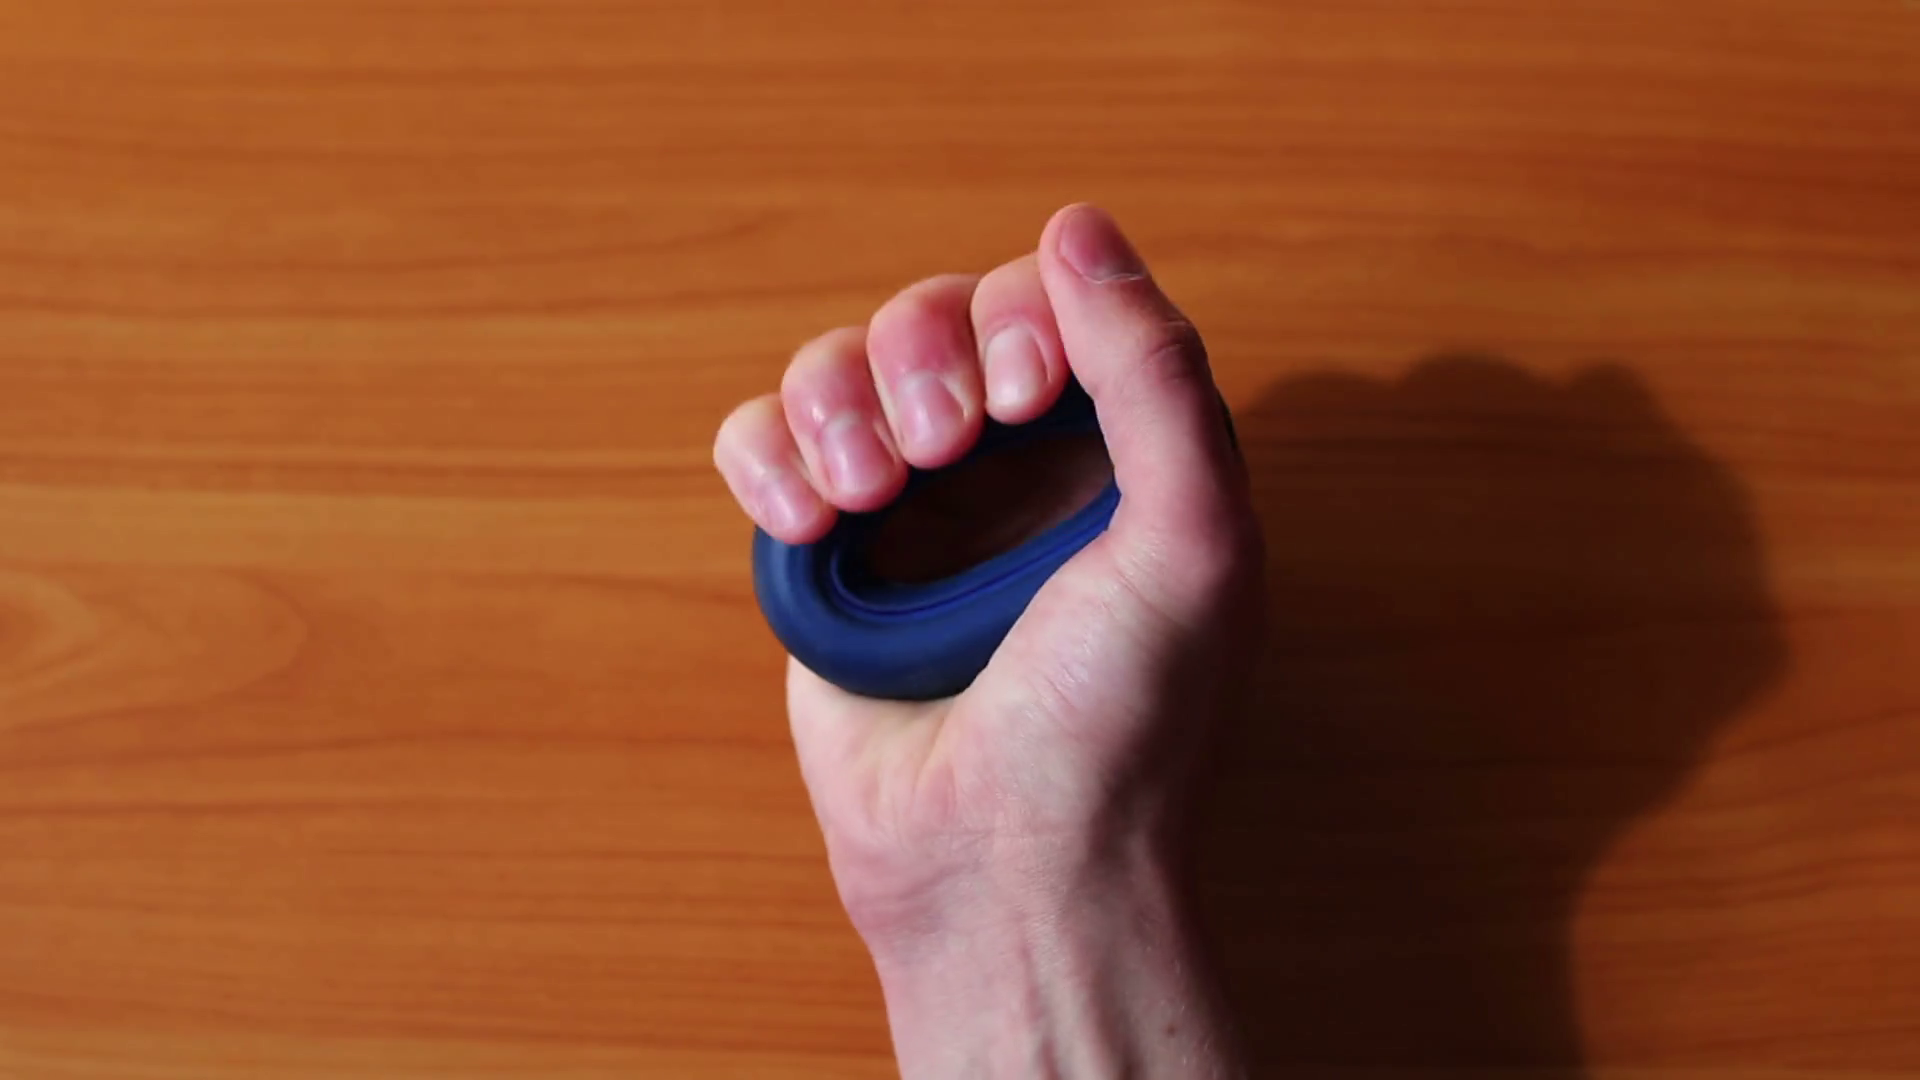 Man squeezes hand expander, strengthens muscles in hand, fingers ...